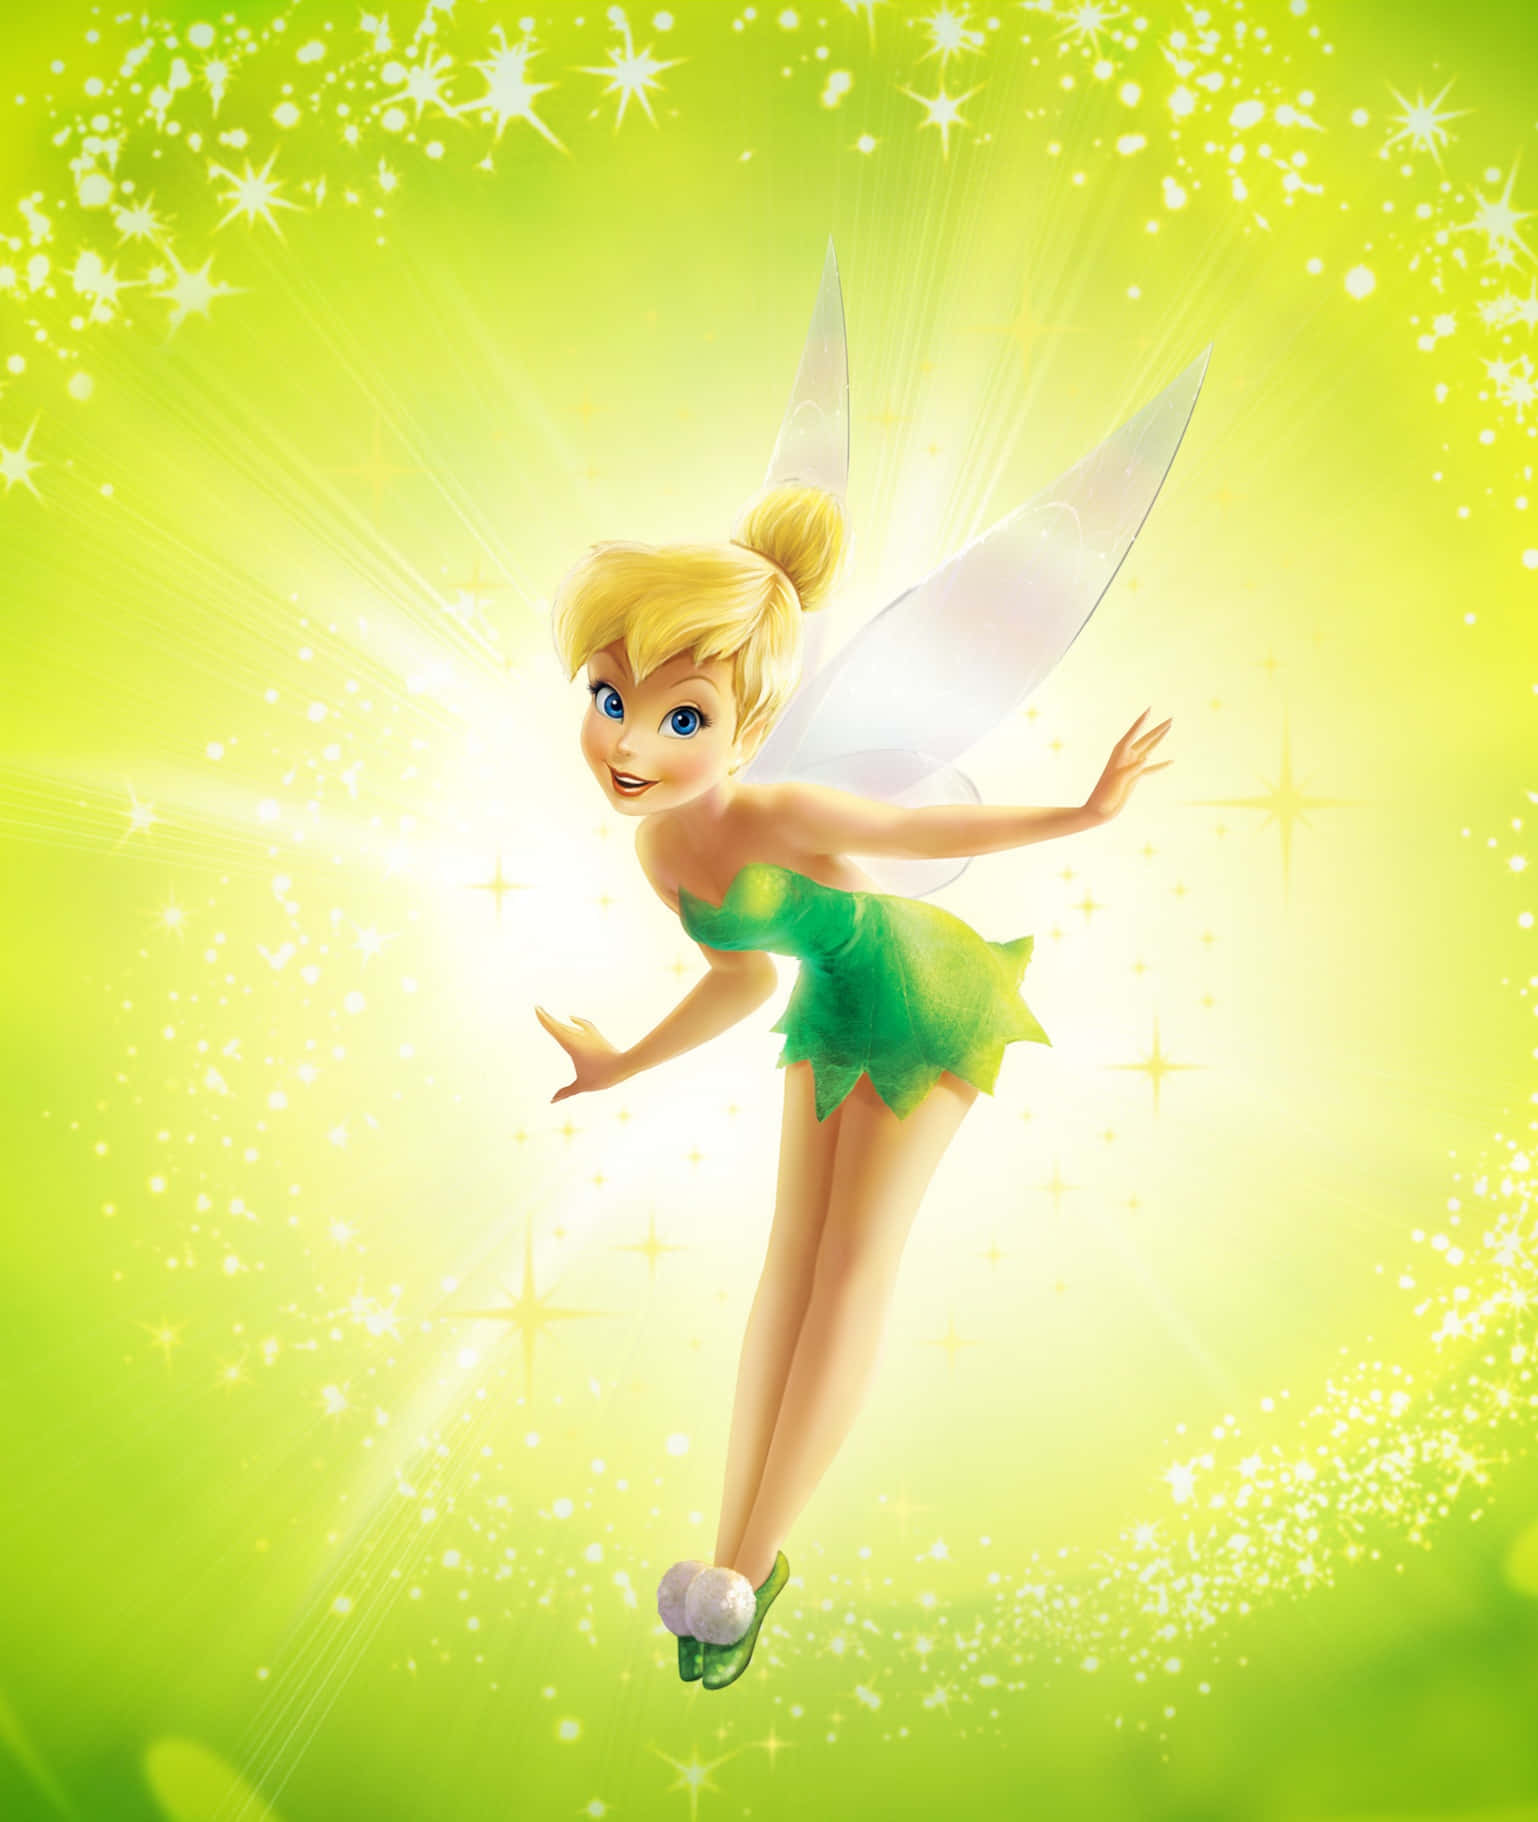 Tinkerbell flying through Pixie Hollow